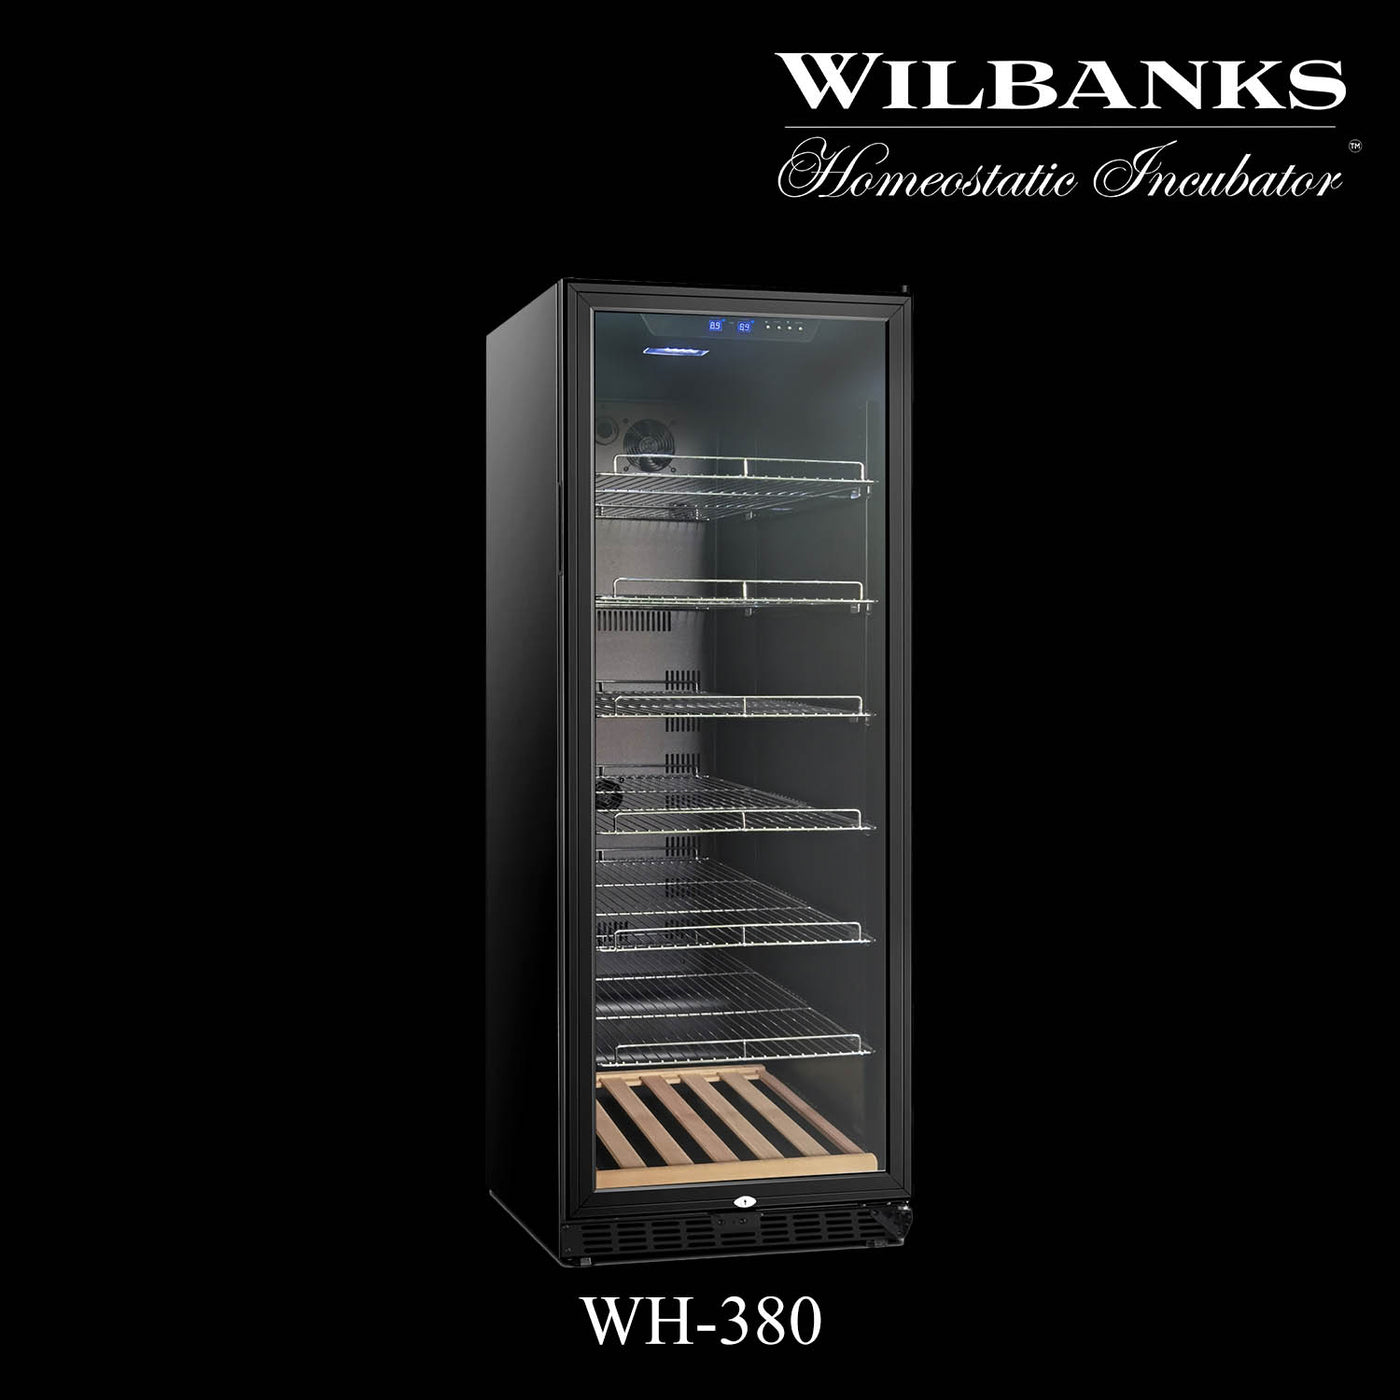 Wilbanks Homeostatic Incubator™  WH-380 (Capacity - 29 Ball Python Clutches*)